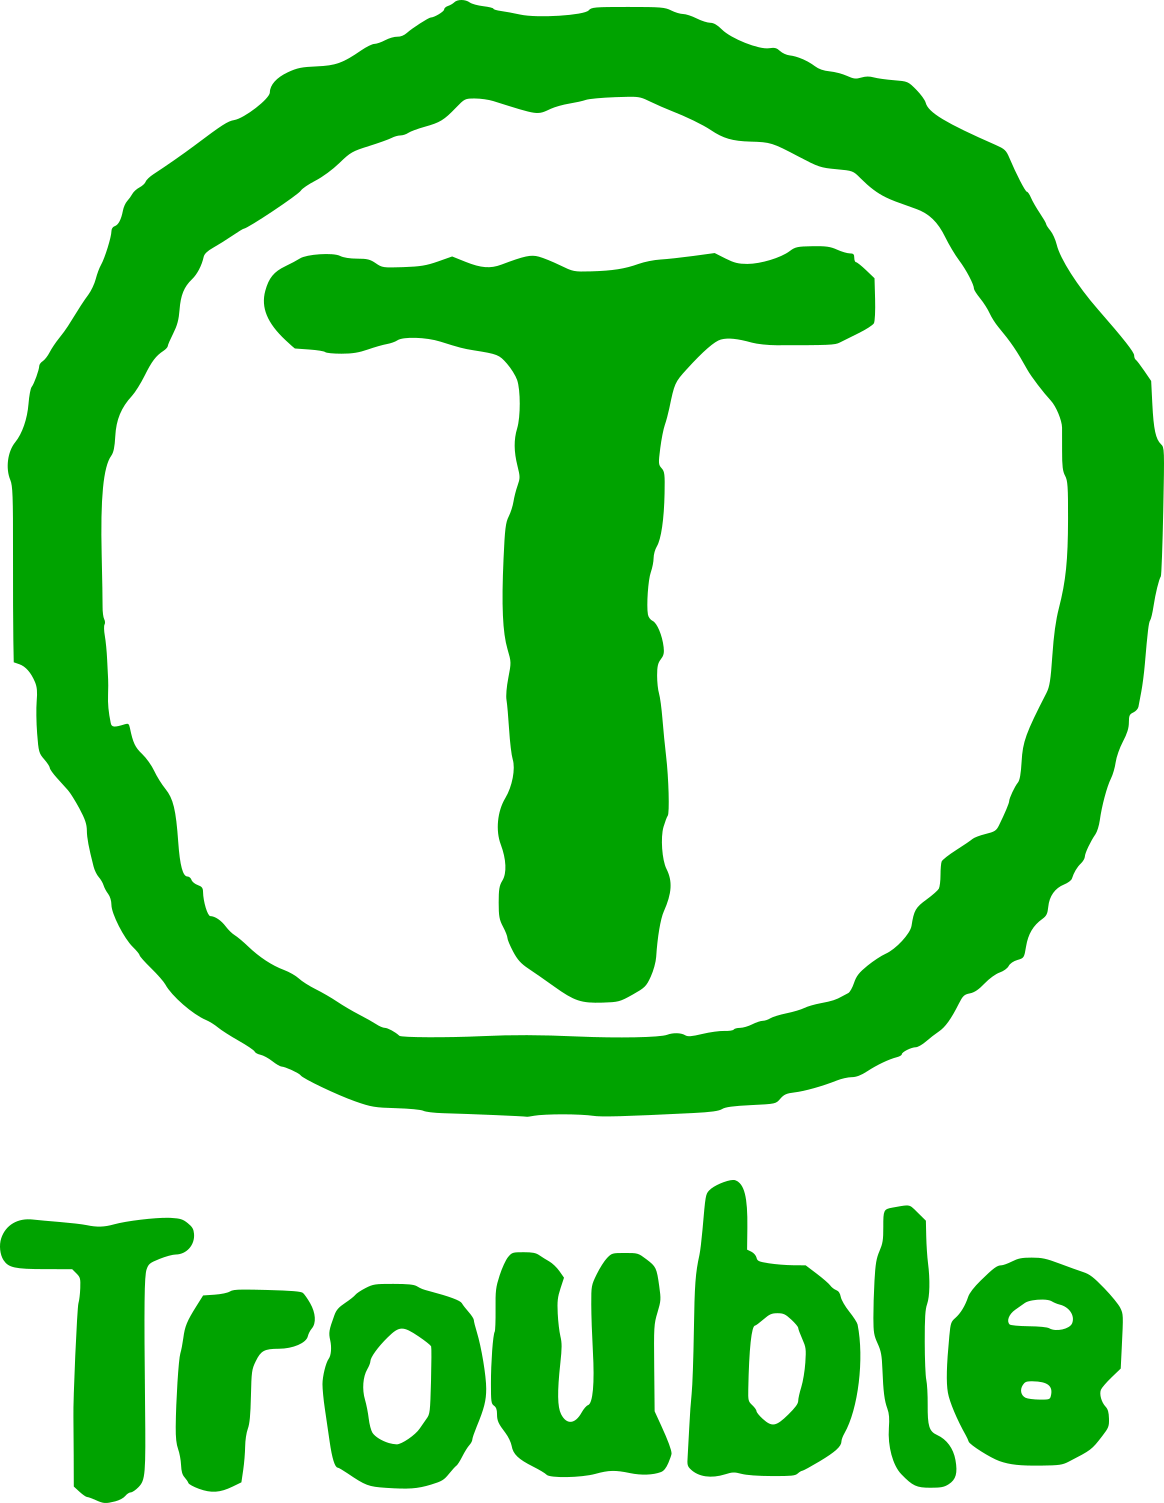 Trouble Logo - TCC and Trouble Logos are present